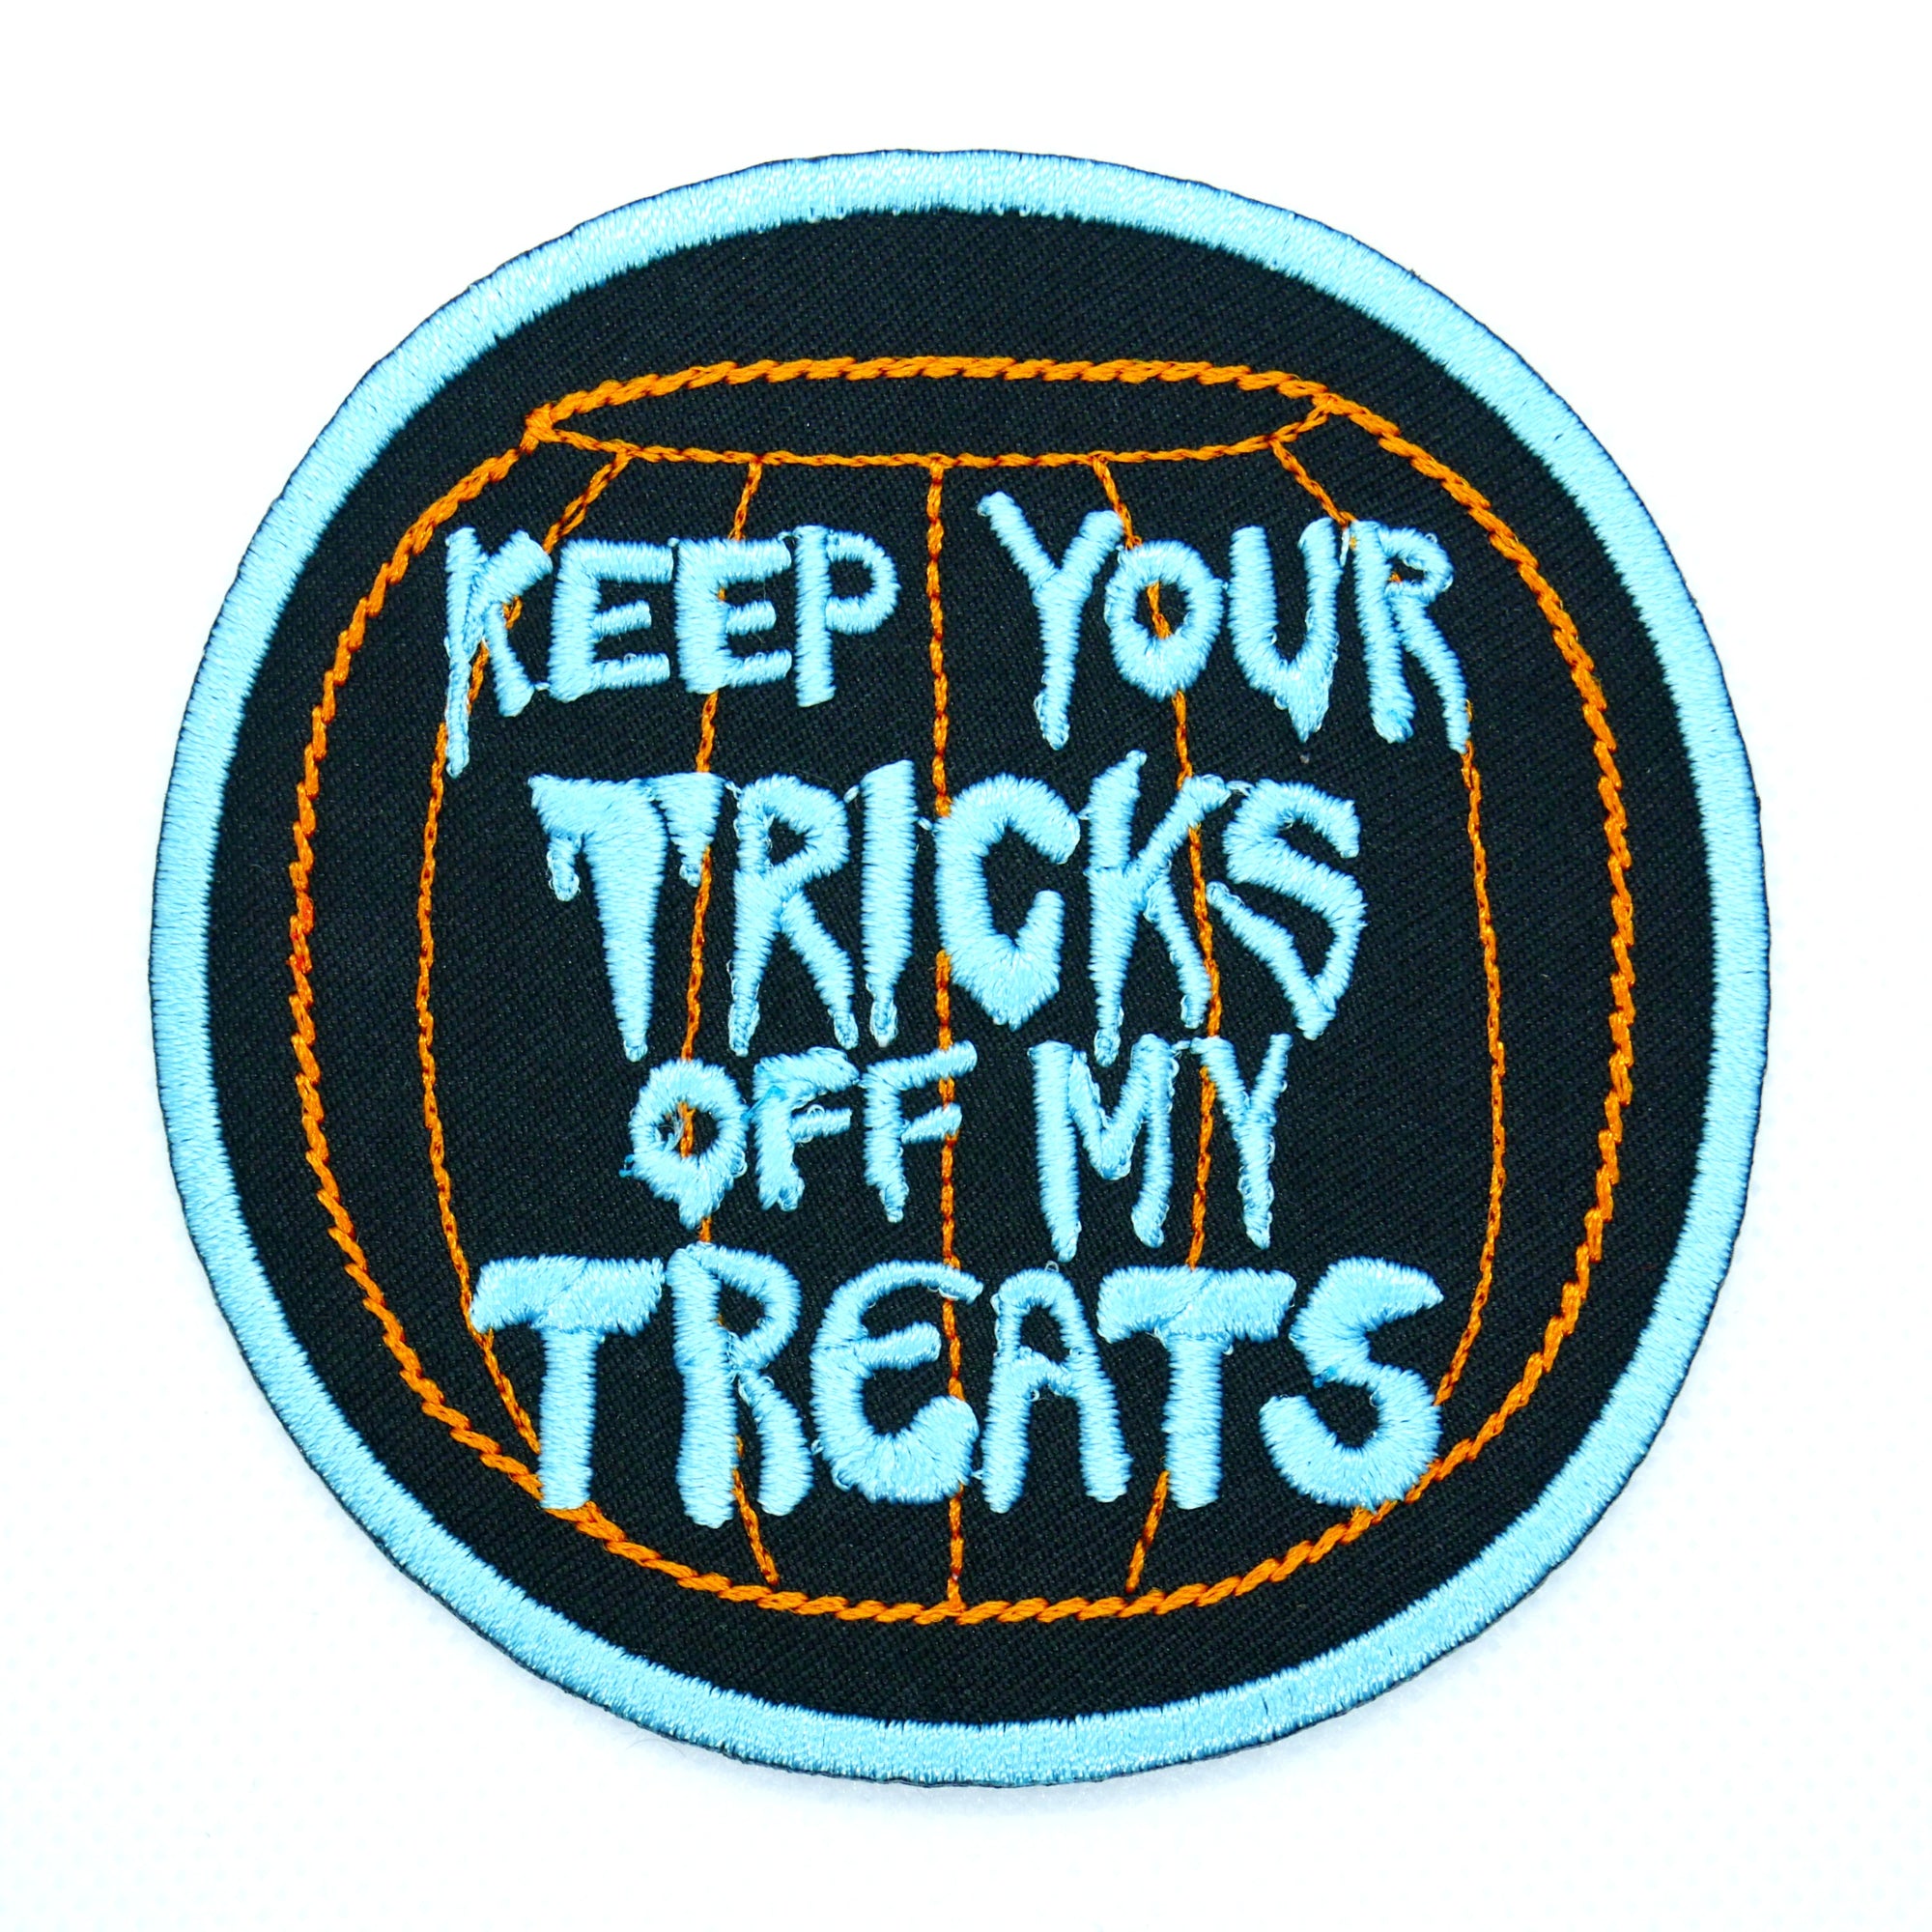 Keep Your Tricks Off My Treats Patch